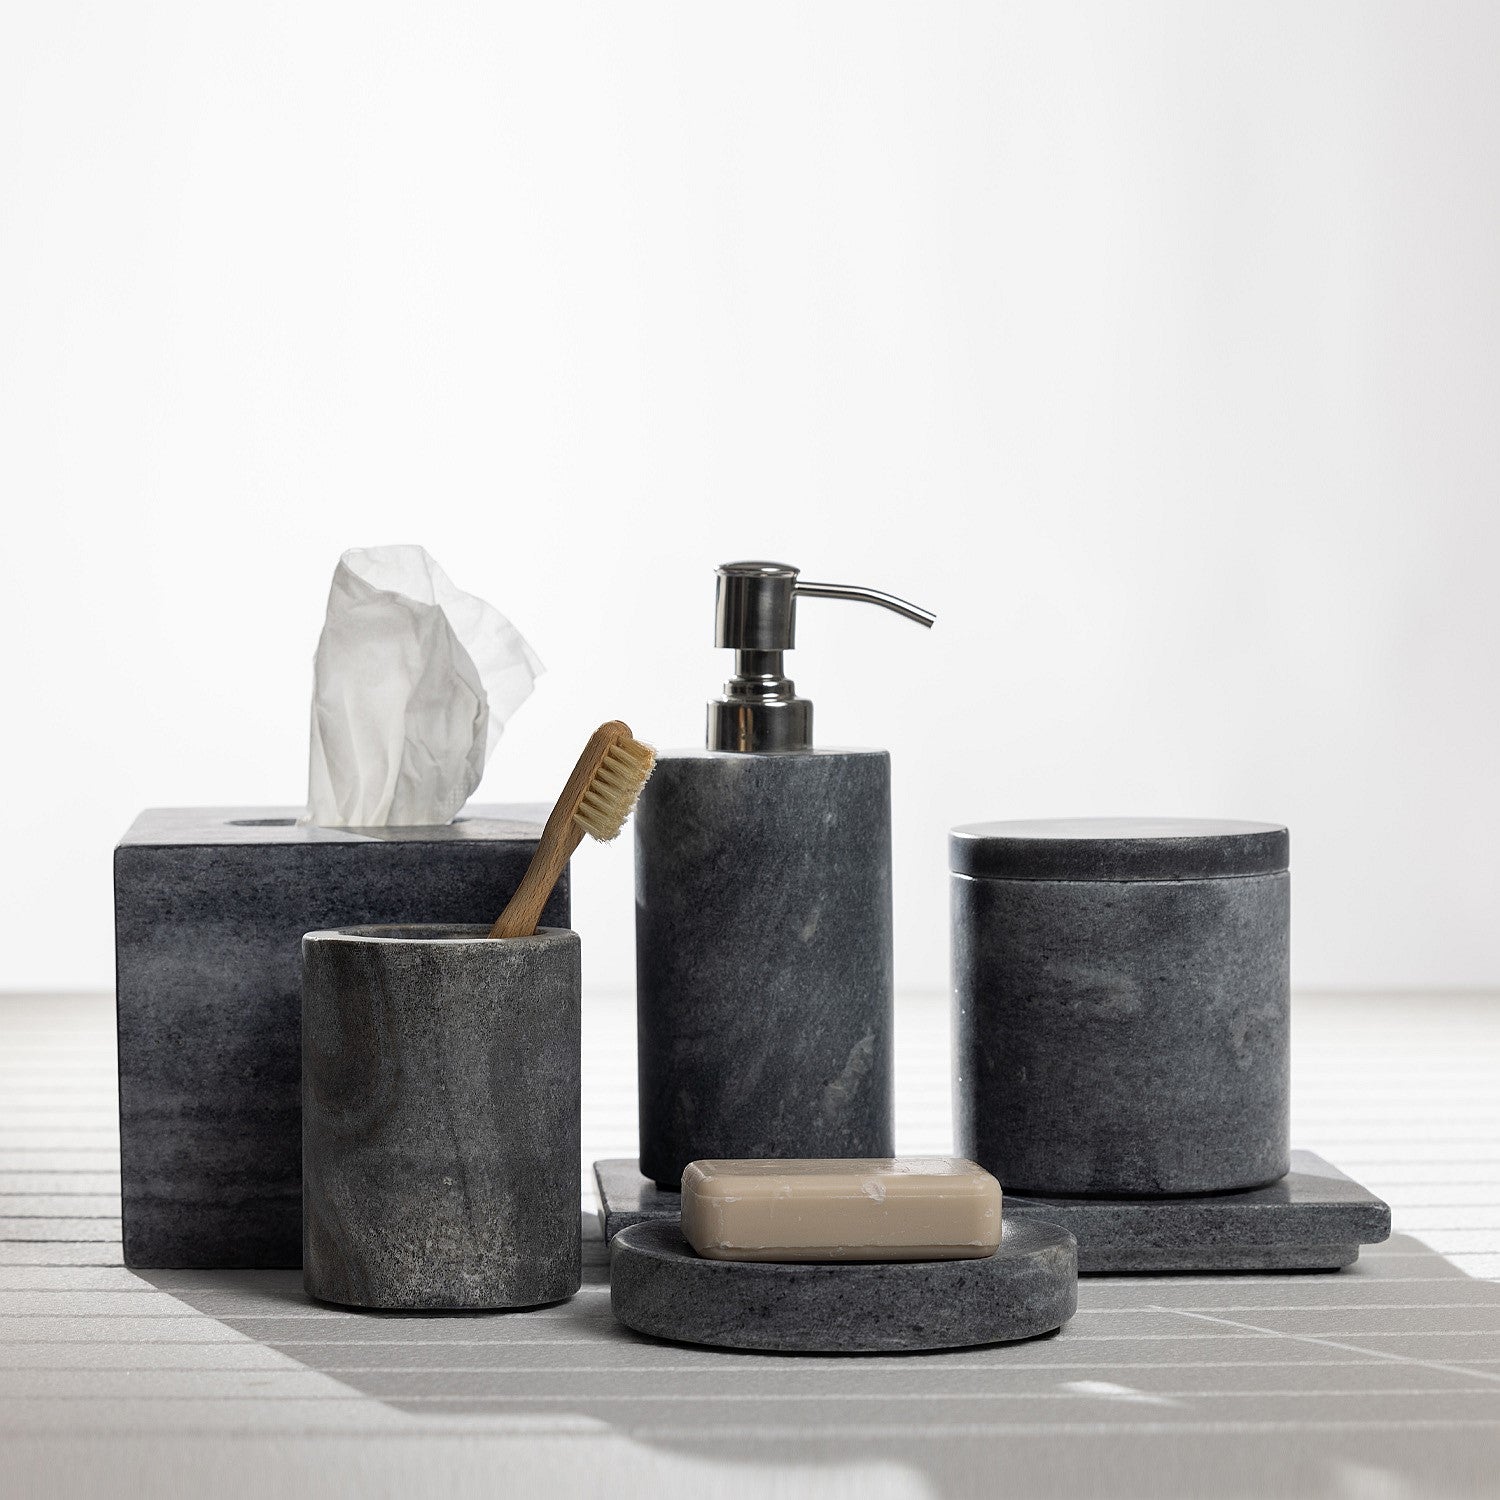 Marble Soap Dispensers: An Elegant and Practical Addition to Your Kitchen